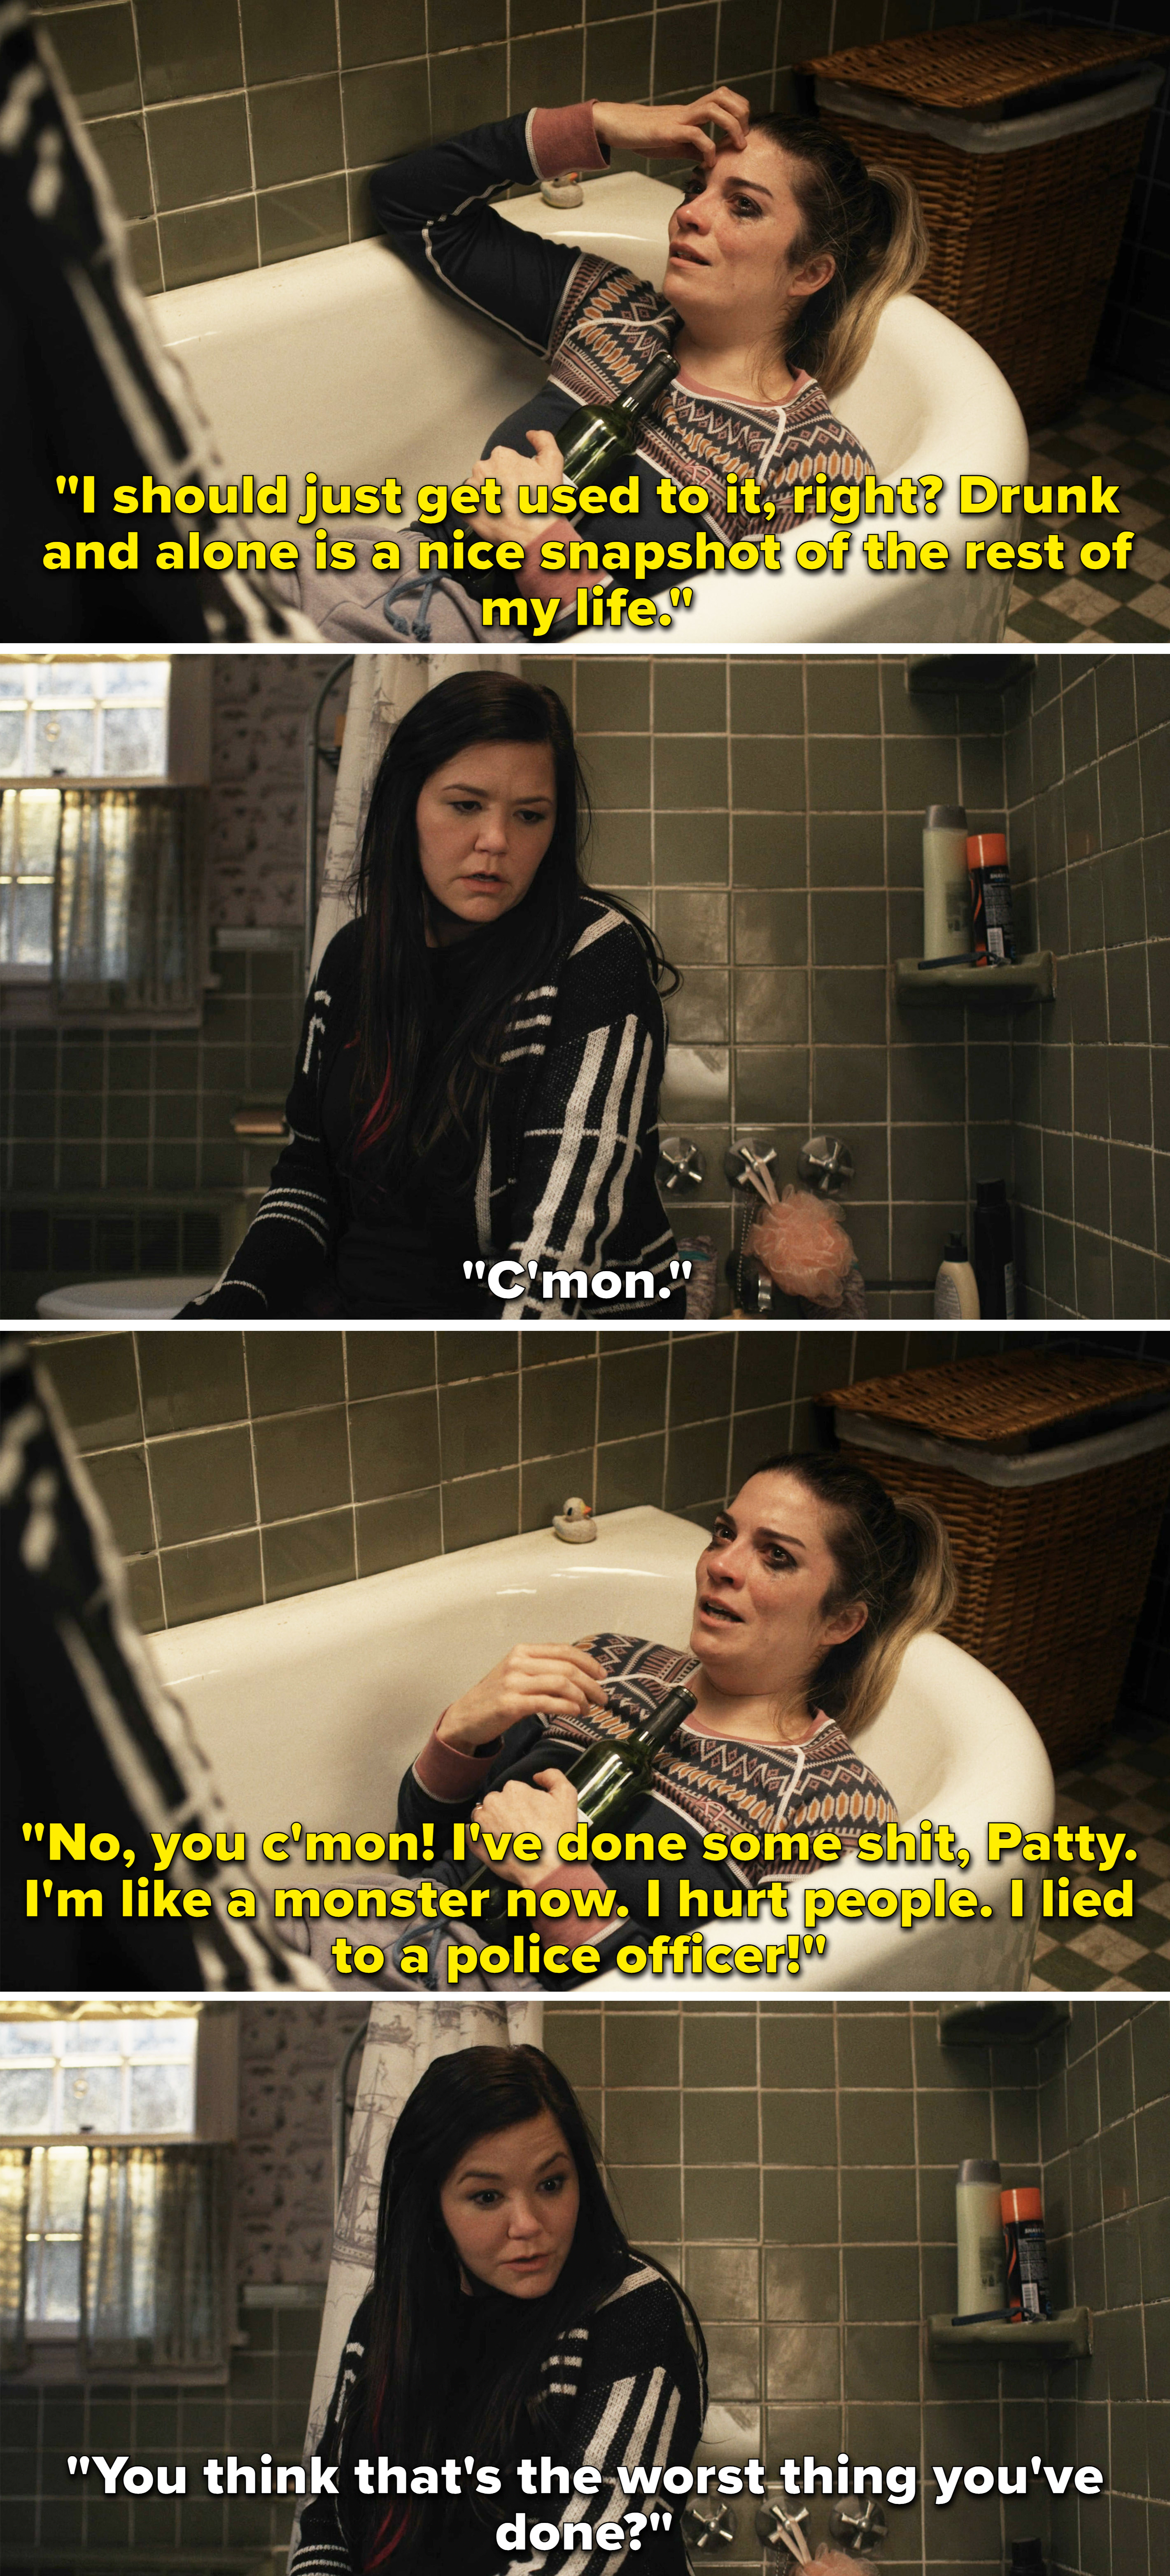 Allison sitting in an empty bathtub with a bottle of wine telling her friend that she&#x27;s done some terrible things